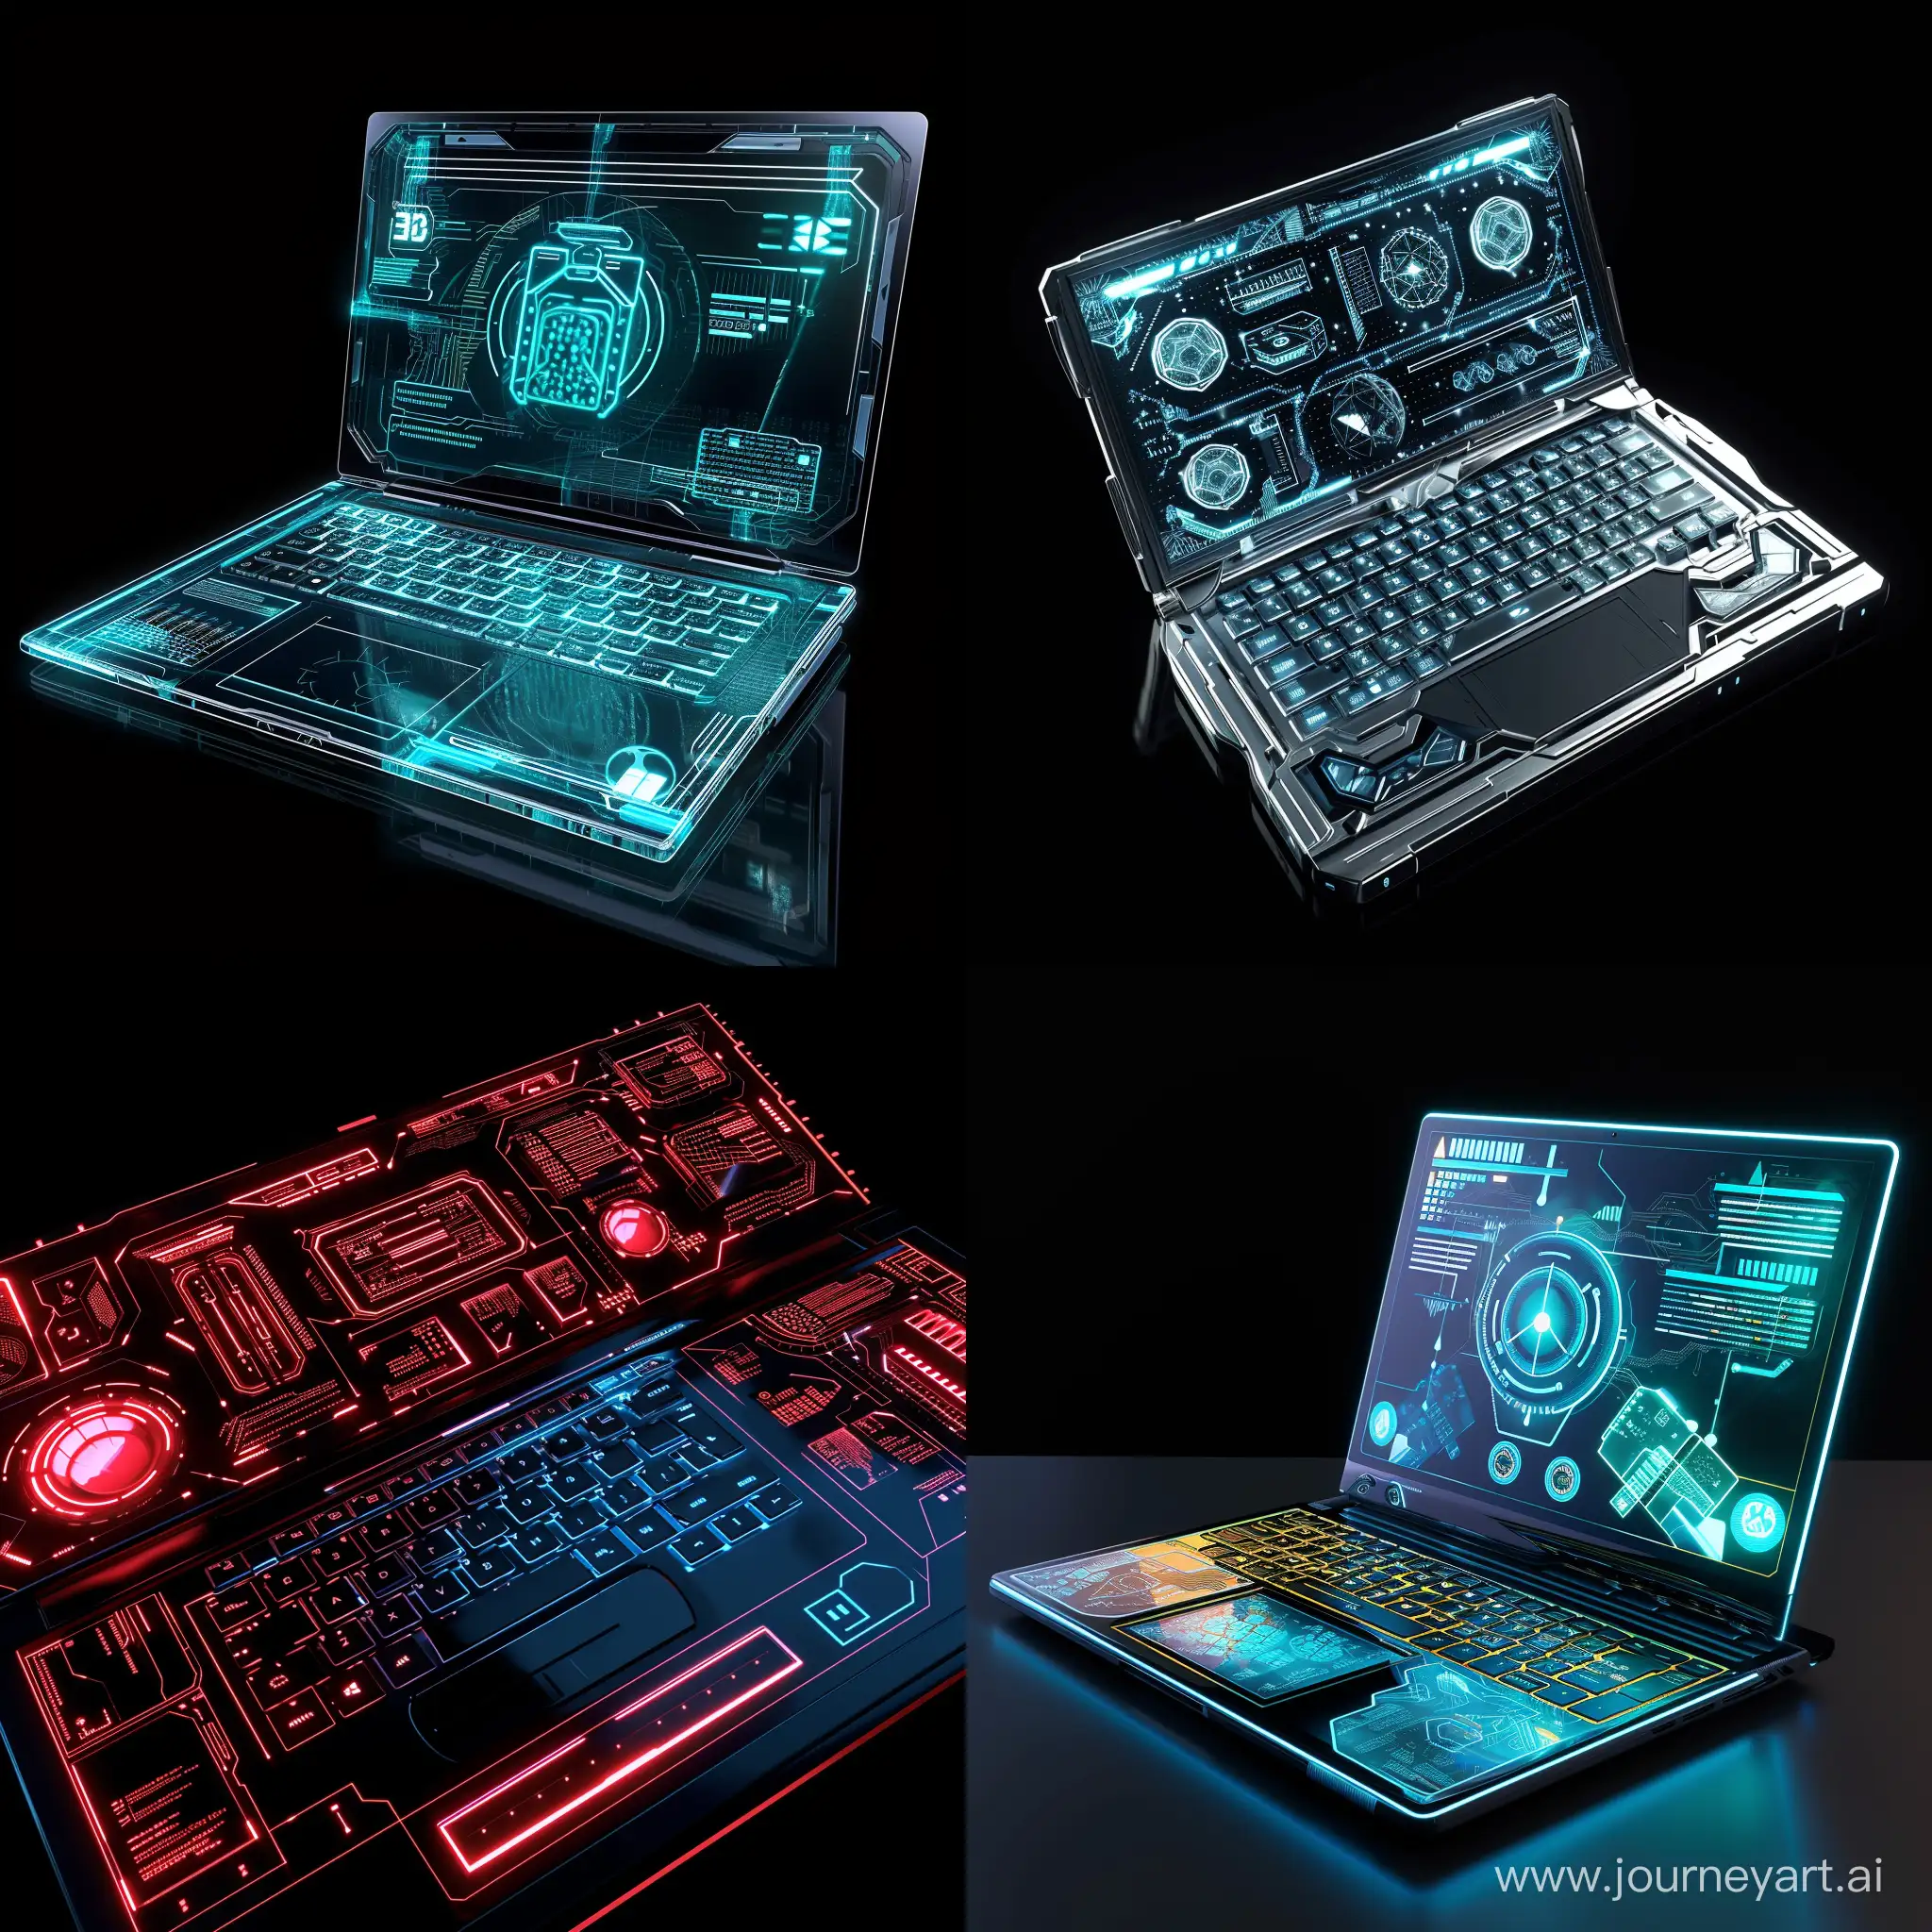 Futuristic-Cyber-Laptop-with-Version-6-and-Aspect-Ratio-11